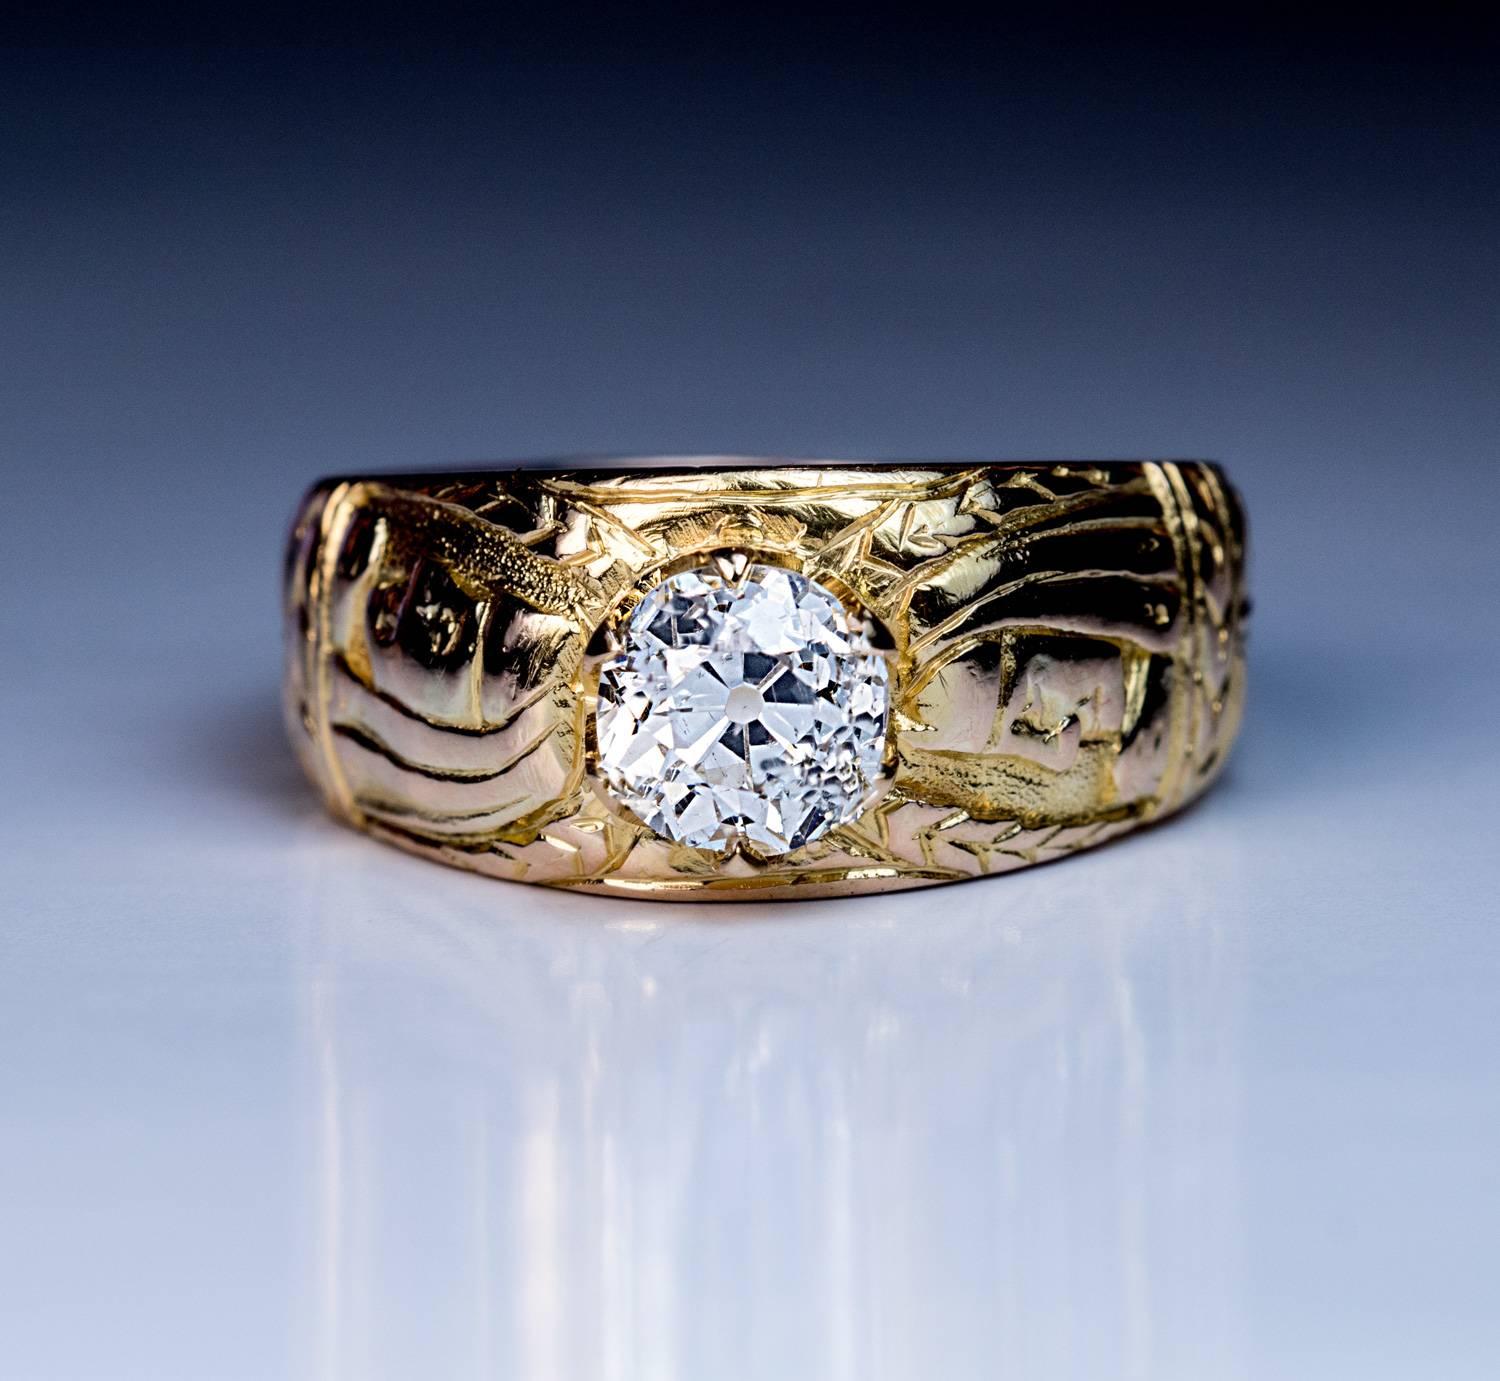 Circa 1890

This highly unusual antique 14K gold ring is chased with two profile busts of an Egyptian pharaoh and stylized floral designs.

The ring is prong set with a sparkling old European cut diamond (J color, SI2 clarity, 6.4-6.3 x 4.3 mm,